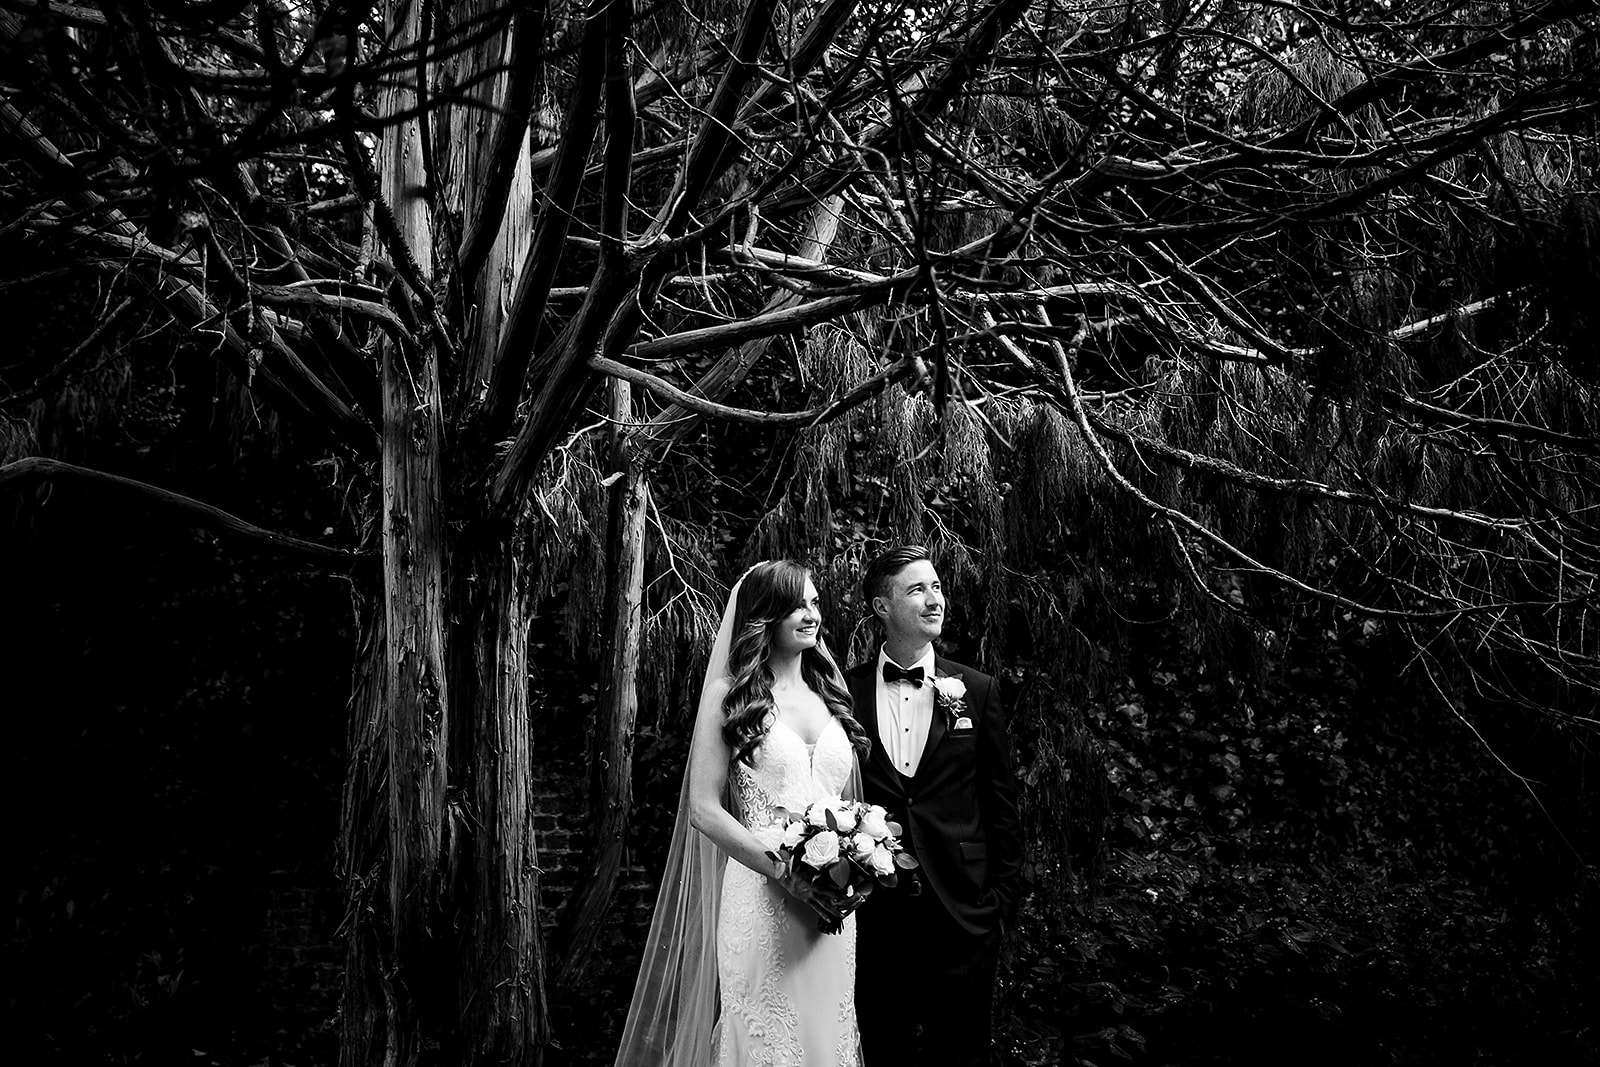 A couple's wedding portrait photos in rathsallagh house in wicklow 